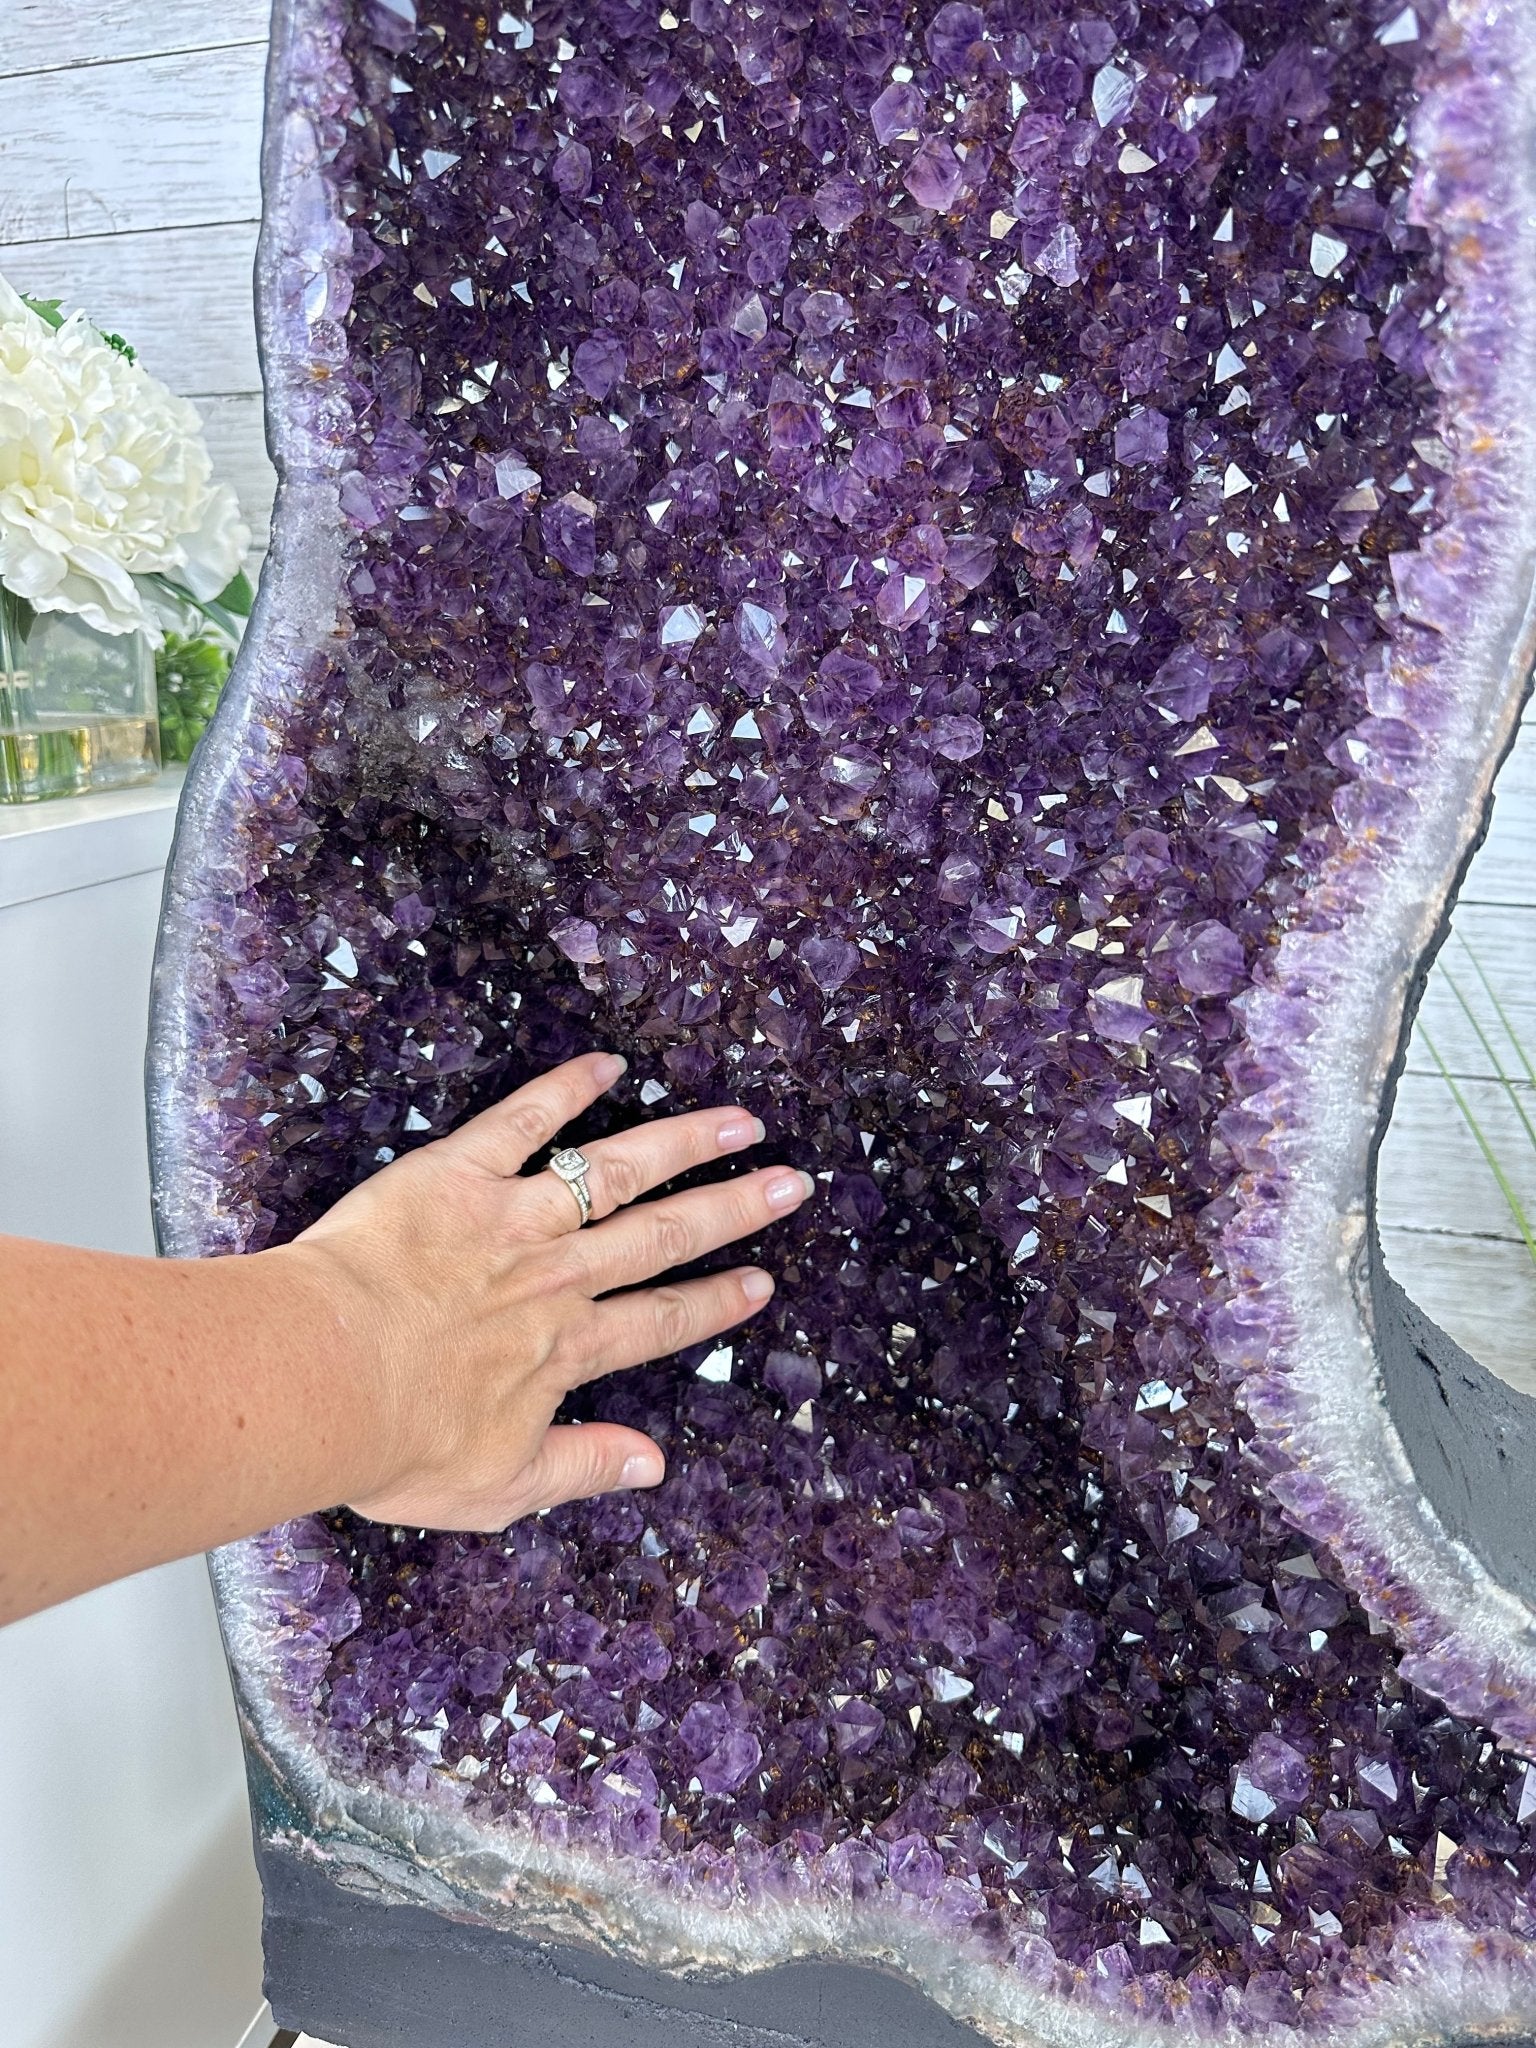 Super Quality Brazilian Amethyst Cathedral, 132 lbs & 28.4" Tall, Model #5601-1302 by Brazil Gems - Brazil GemsBrazil GemsSuper Quality Brazilian Amethyst Cathedral, 132 lbs & 28.4" Tall, Model #5601-1302 by Brazil GemsCathedrals5601-1302